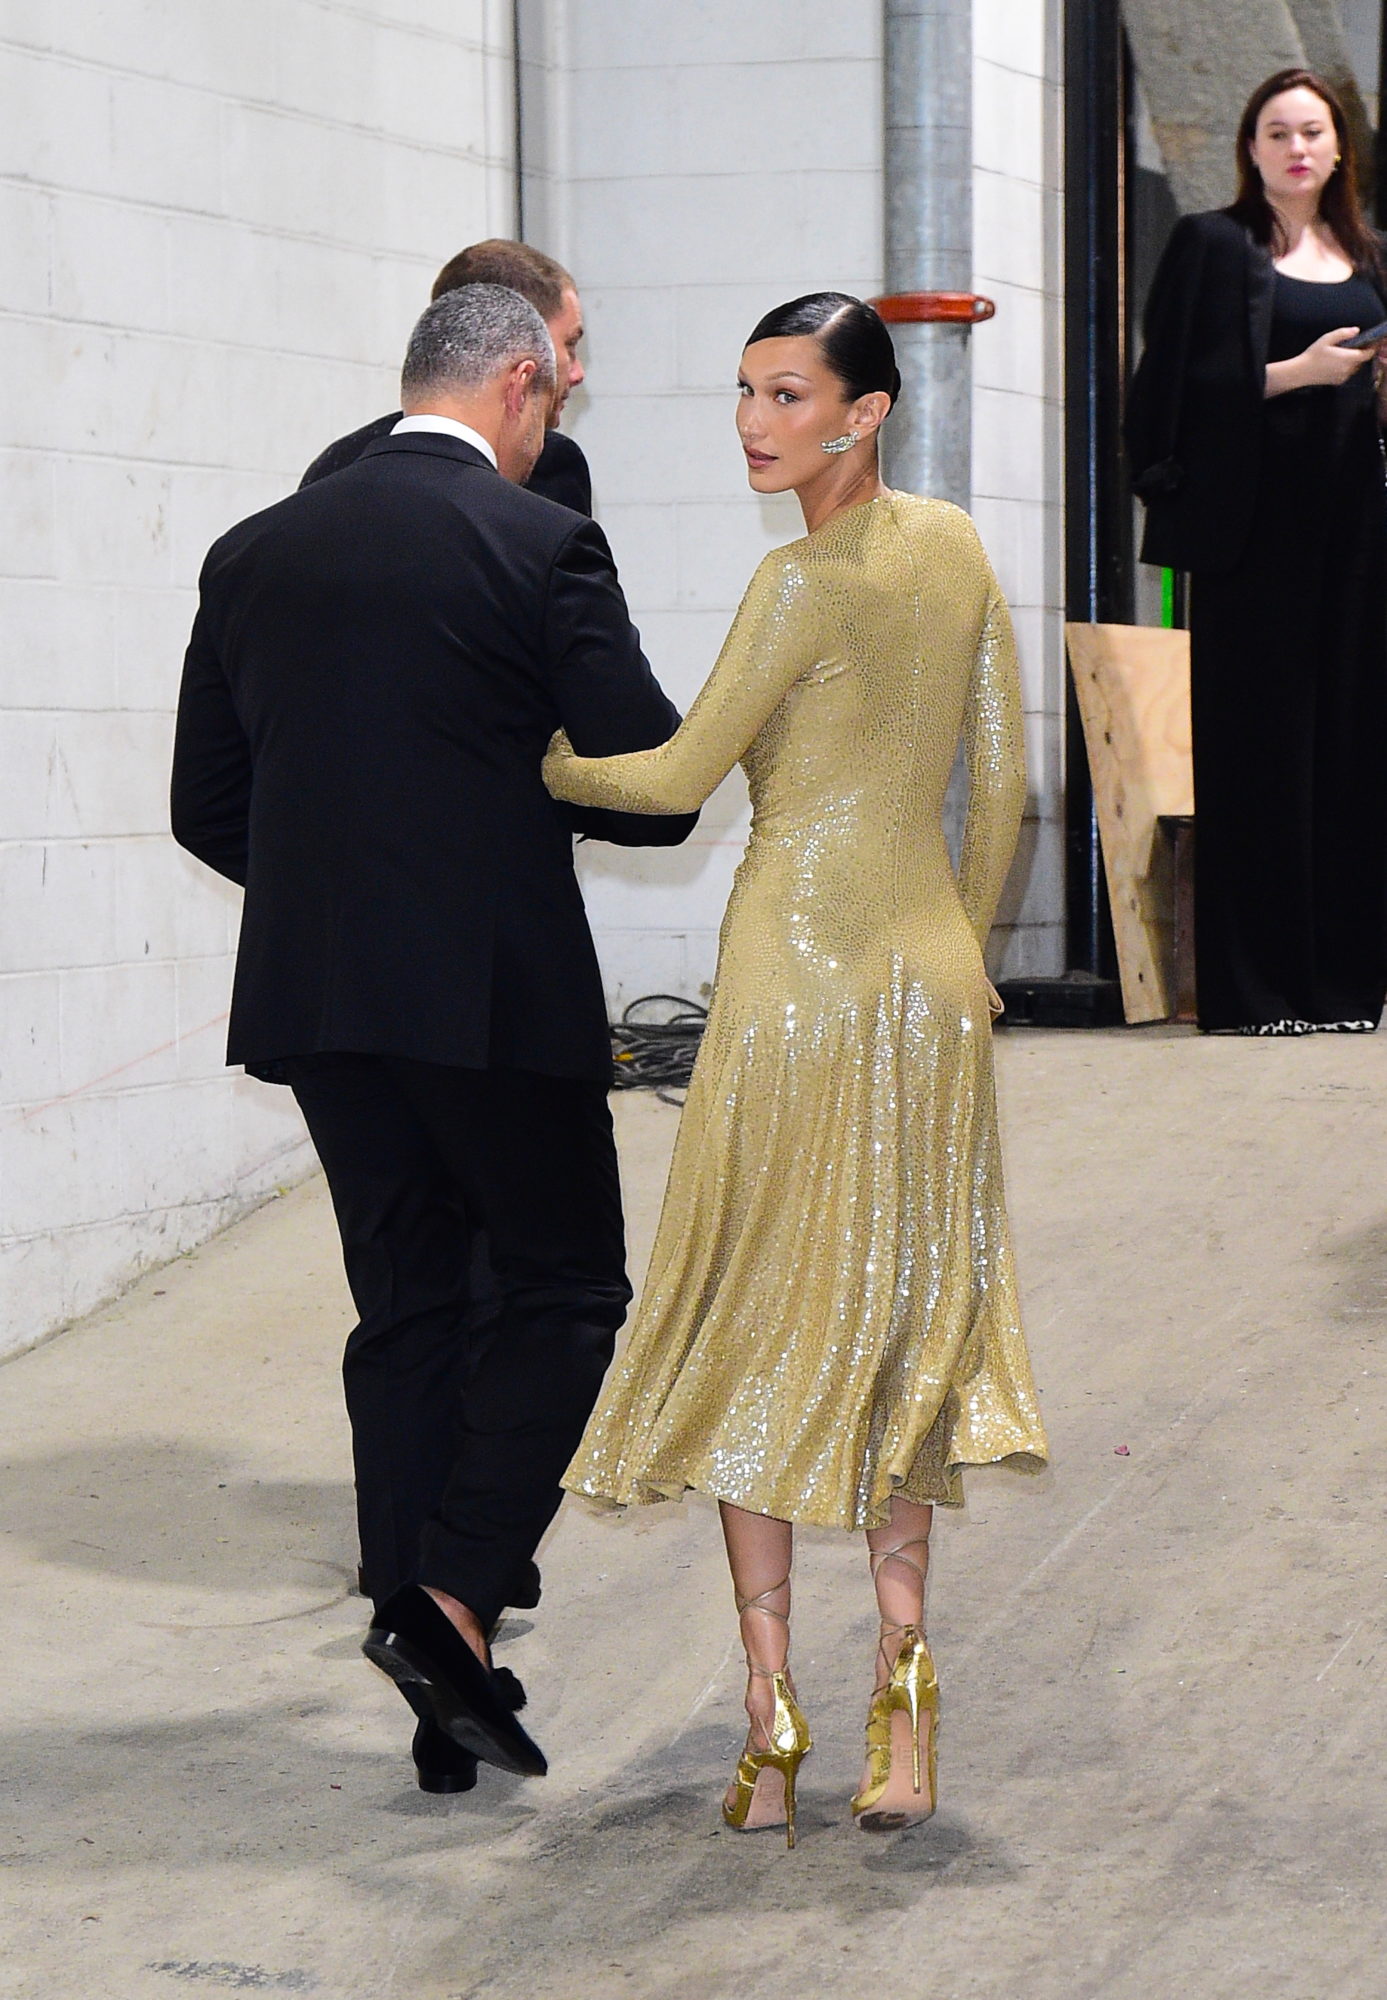 Bella Hadid gave us a lesson in eveningwear in a gold sequin dress